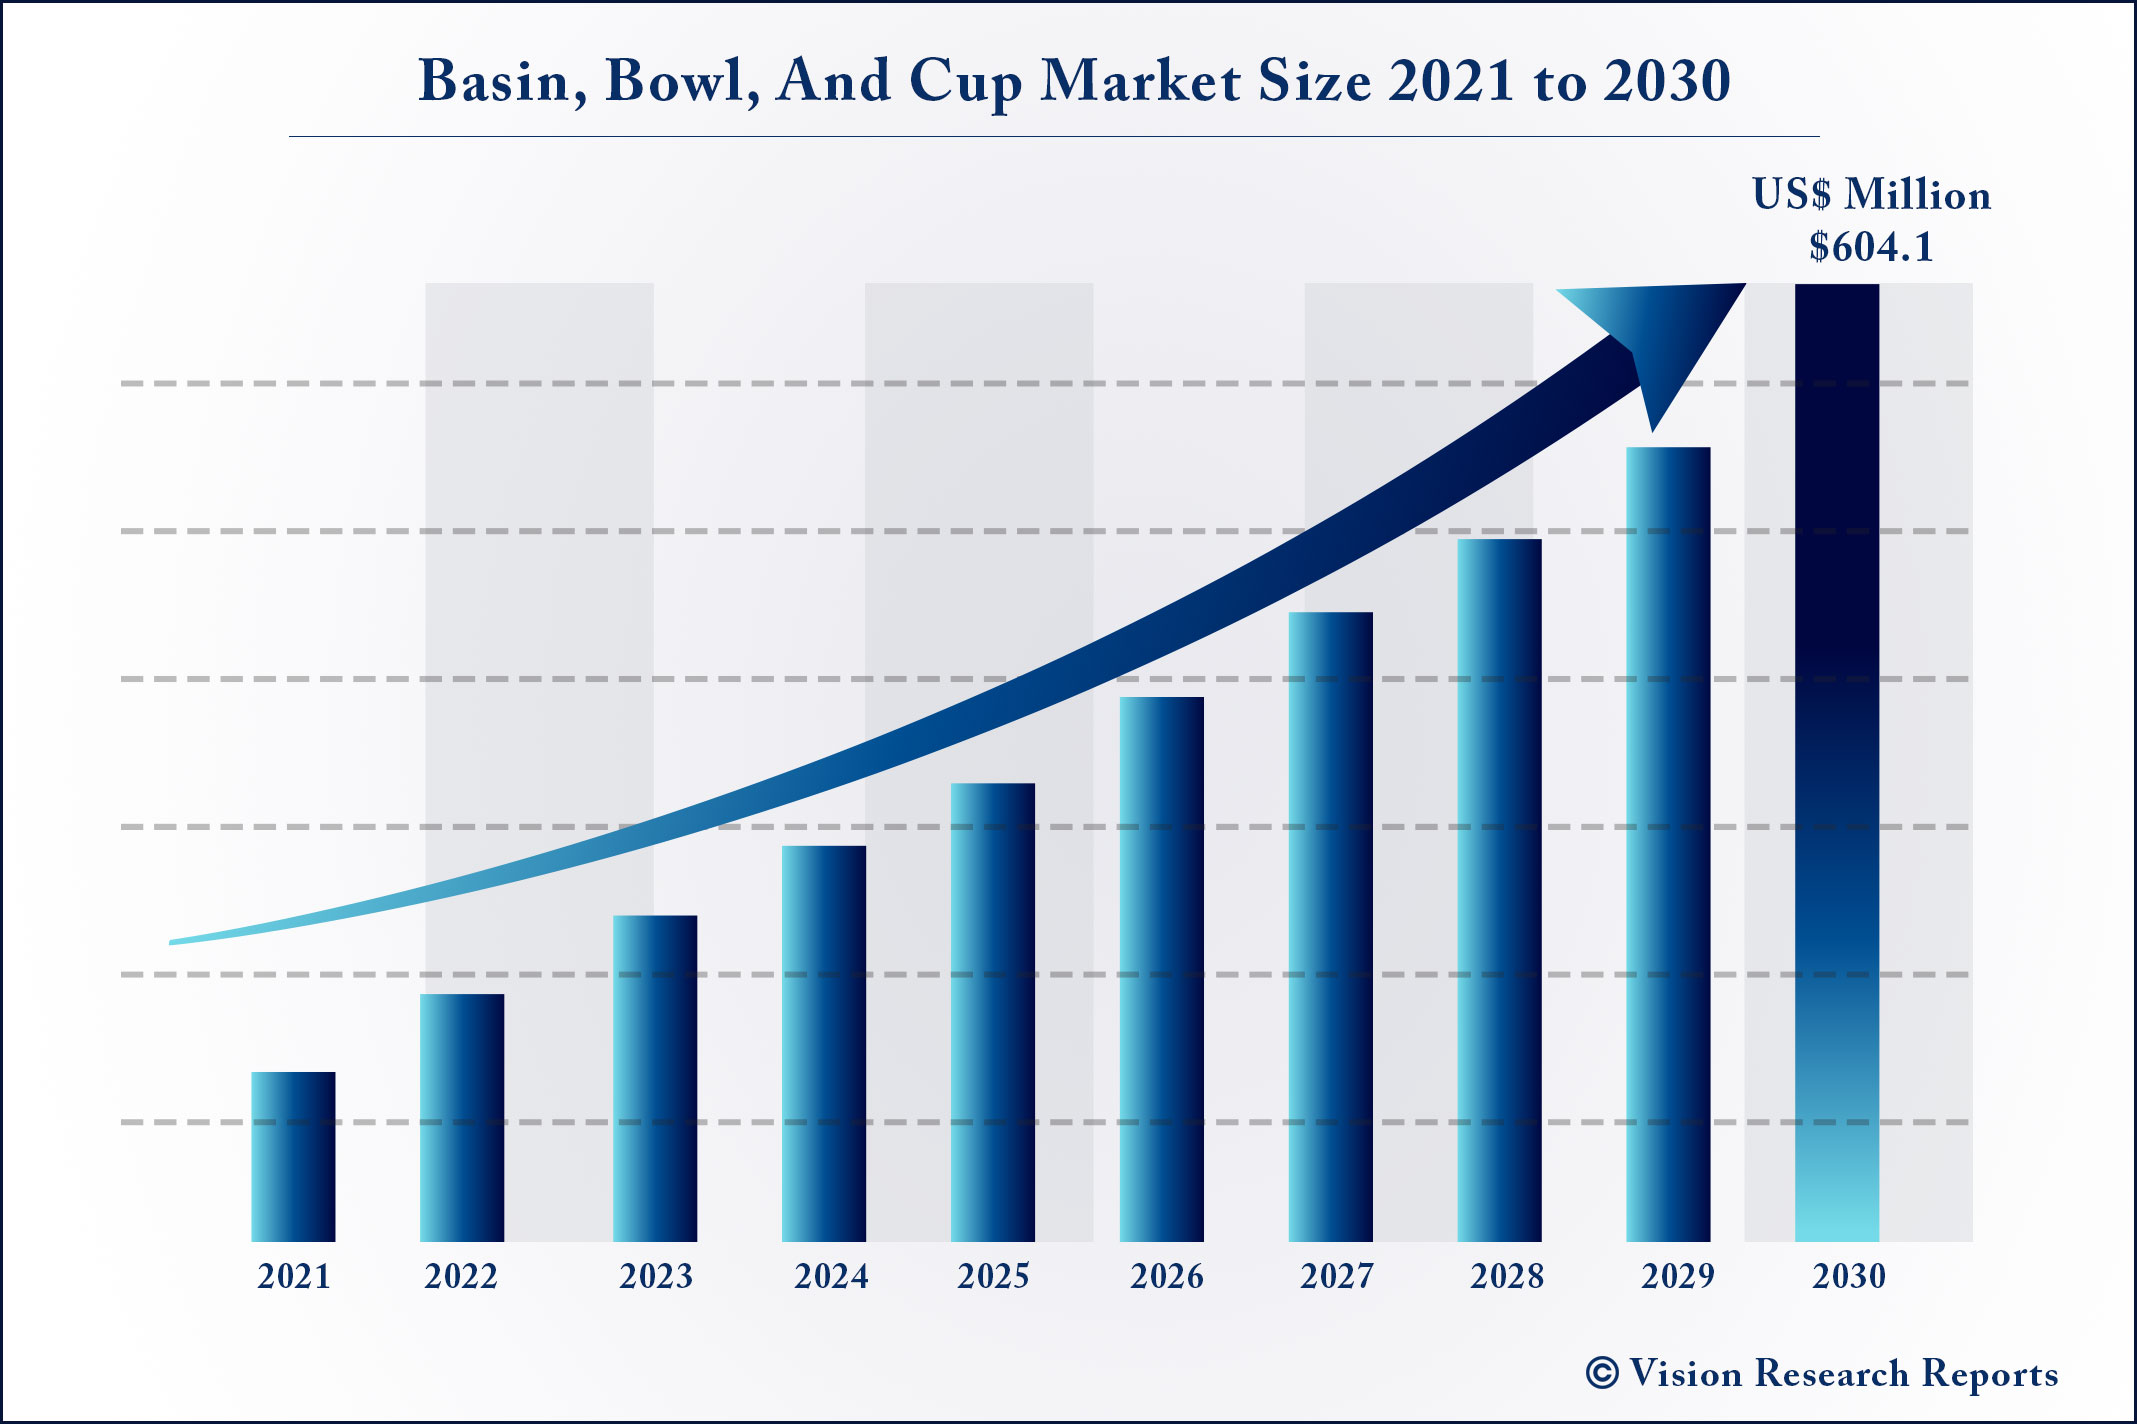 Basin, Bowl, And Cup Market Size 2021 to 2030